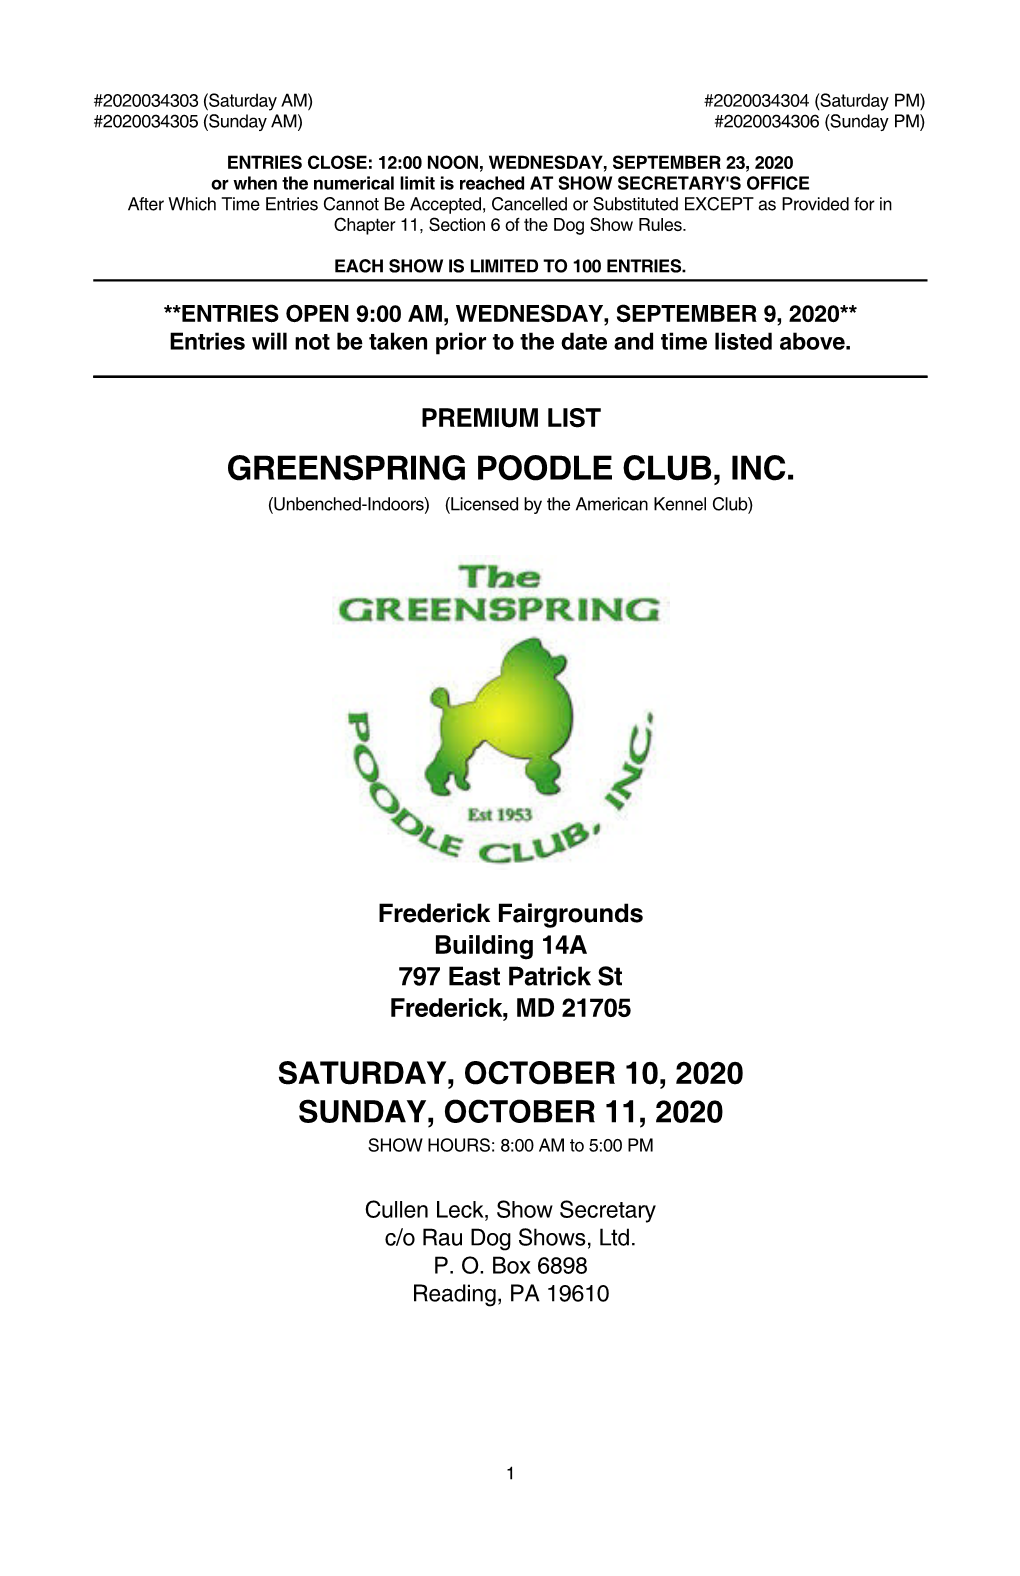 GREENSPRING POODLE CLUB, INC. (Unbenched-Indoors) (Licensed by the American Kennel Club)